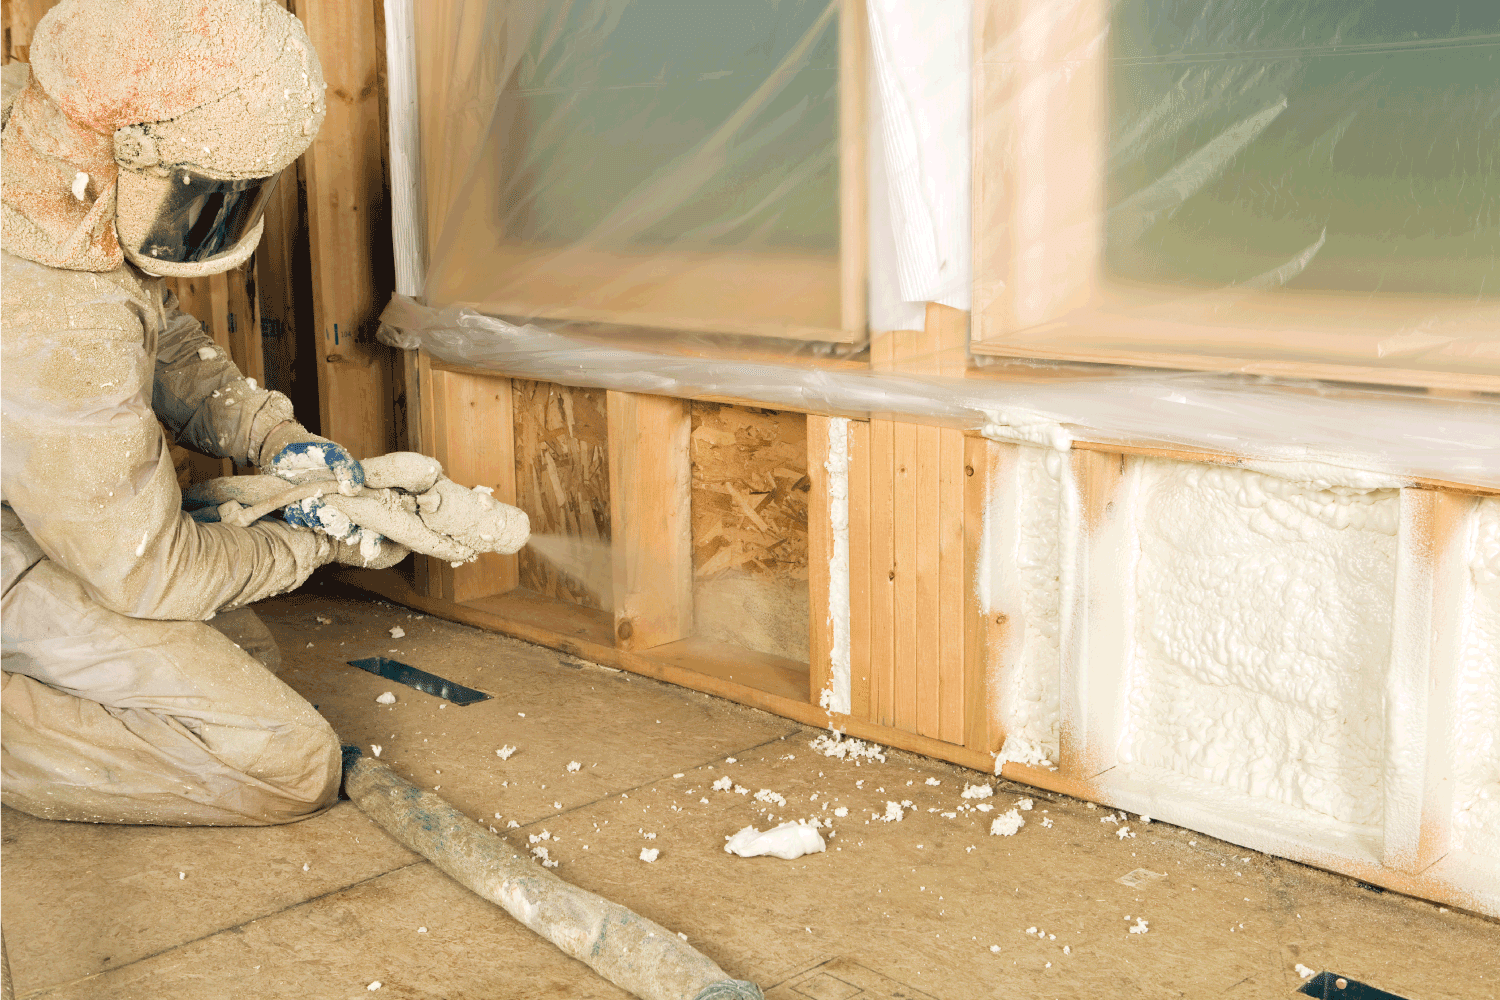 Construction Worker Spraying Expandable Foam Insulation between Wall Studs. Does Cellulose Insulation Deter Mice And Other Pests